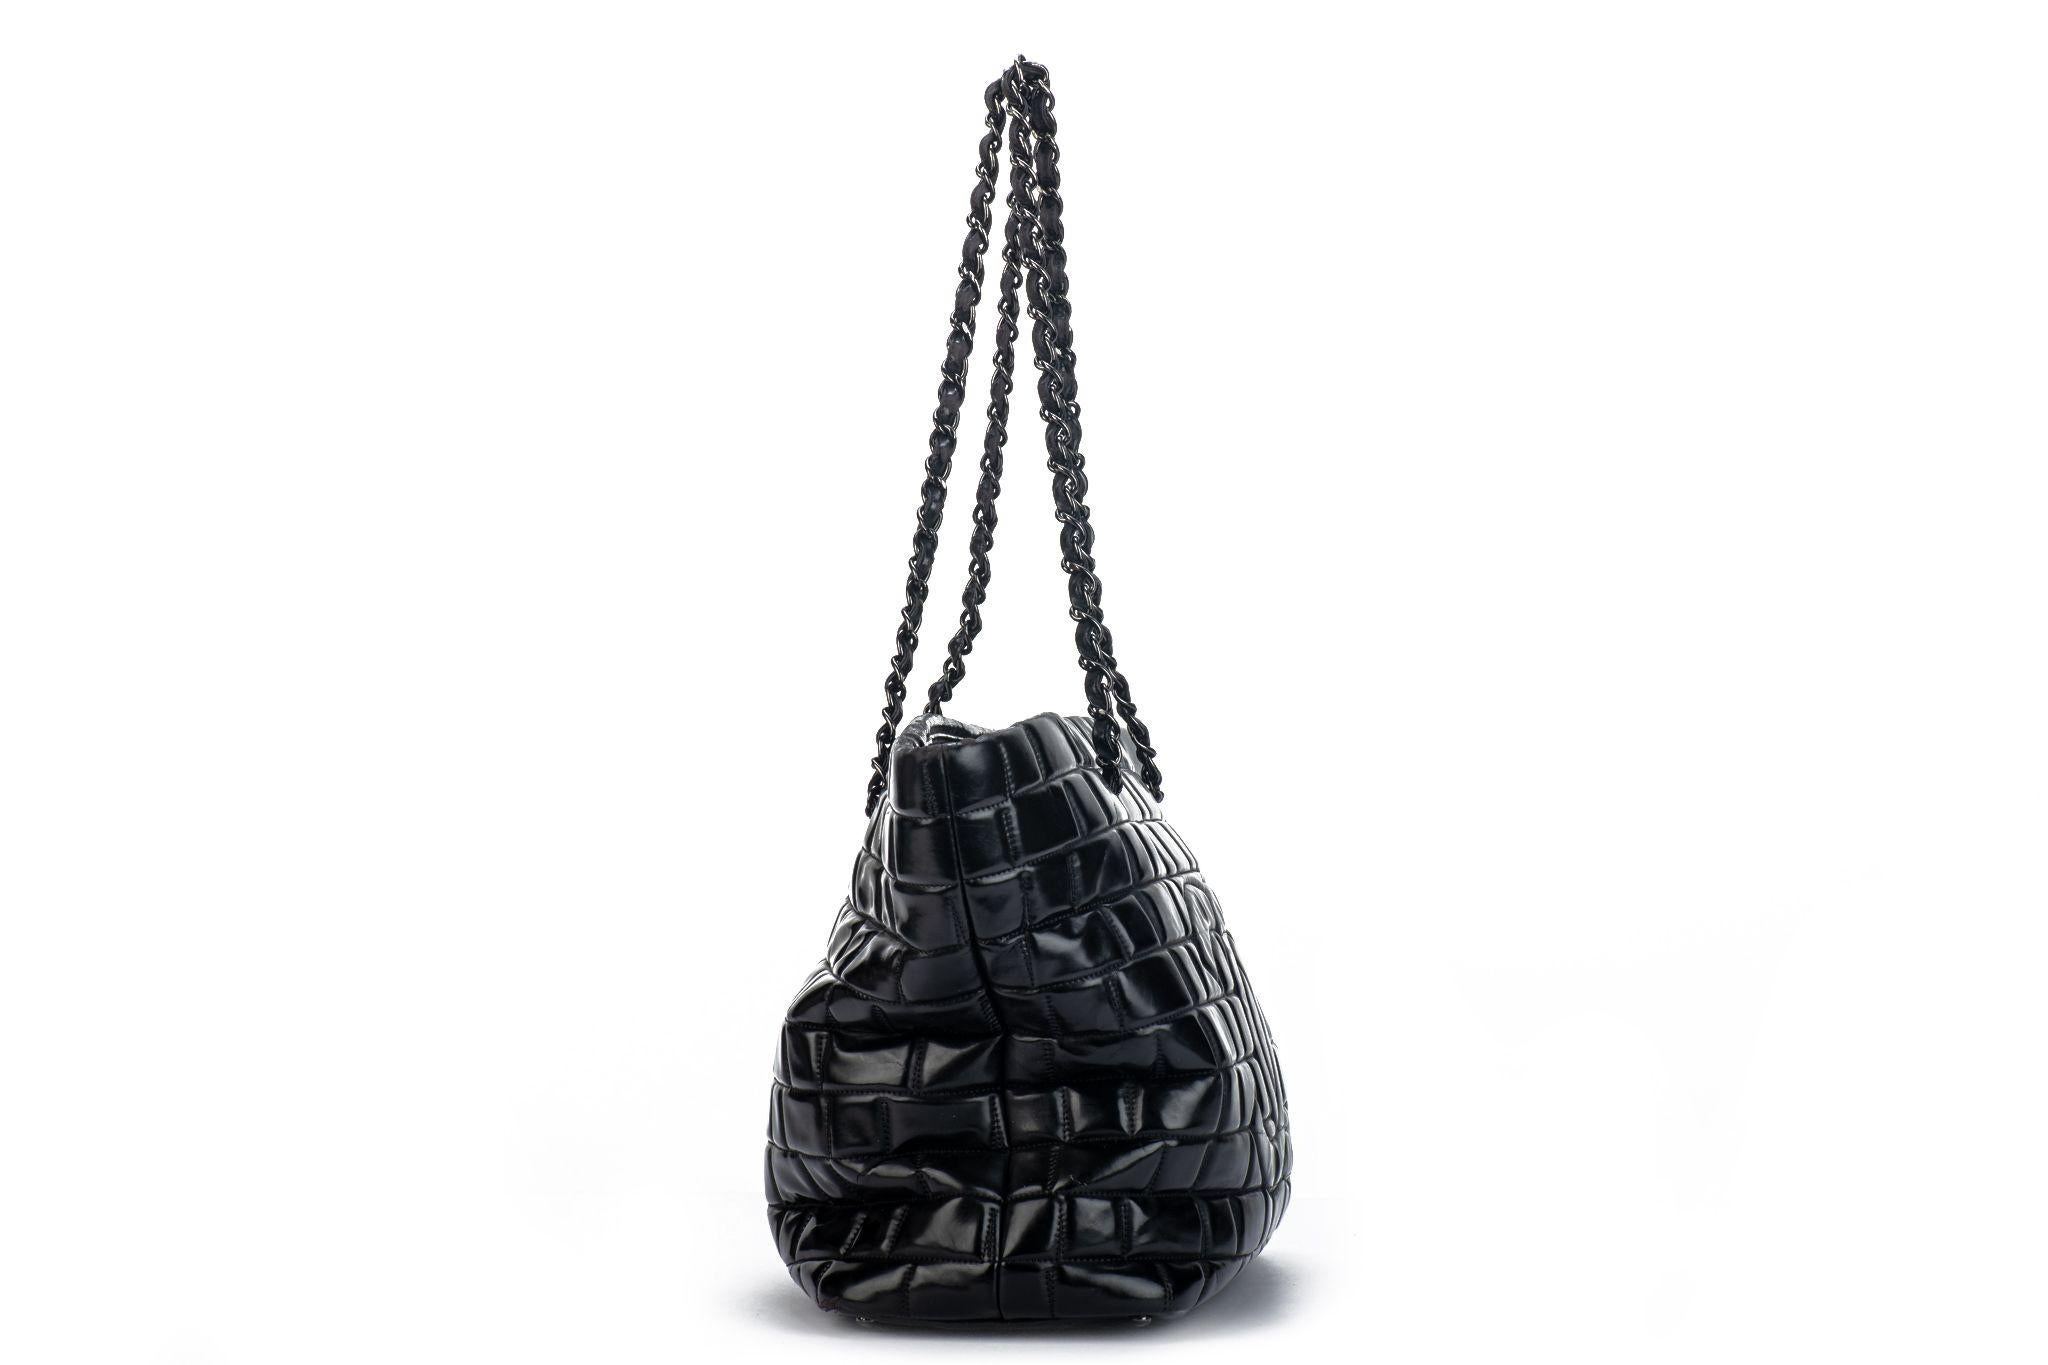 Chanel Black Brushed Leather Large Tote In Good Condition For Sale In West Hollywood, CA